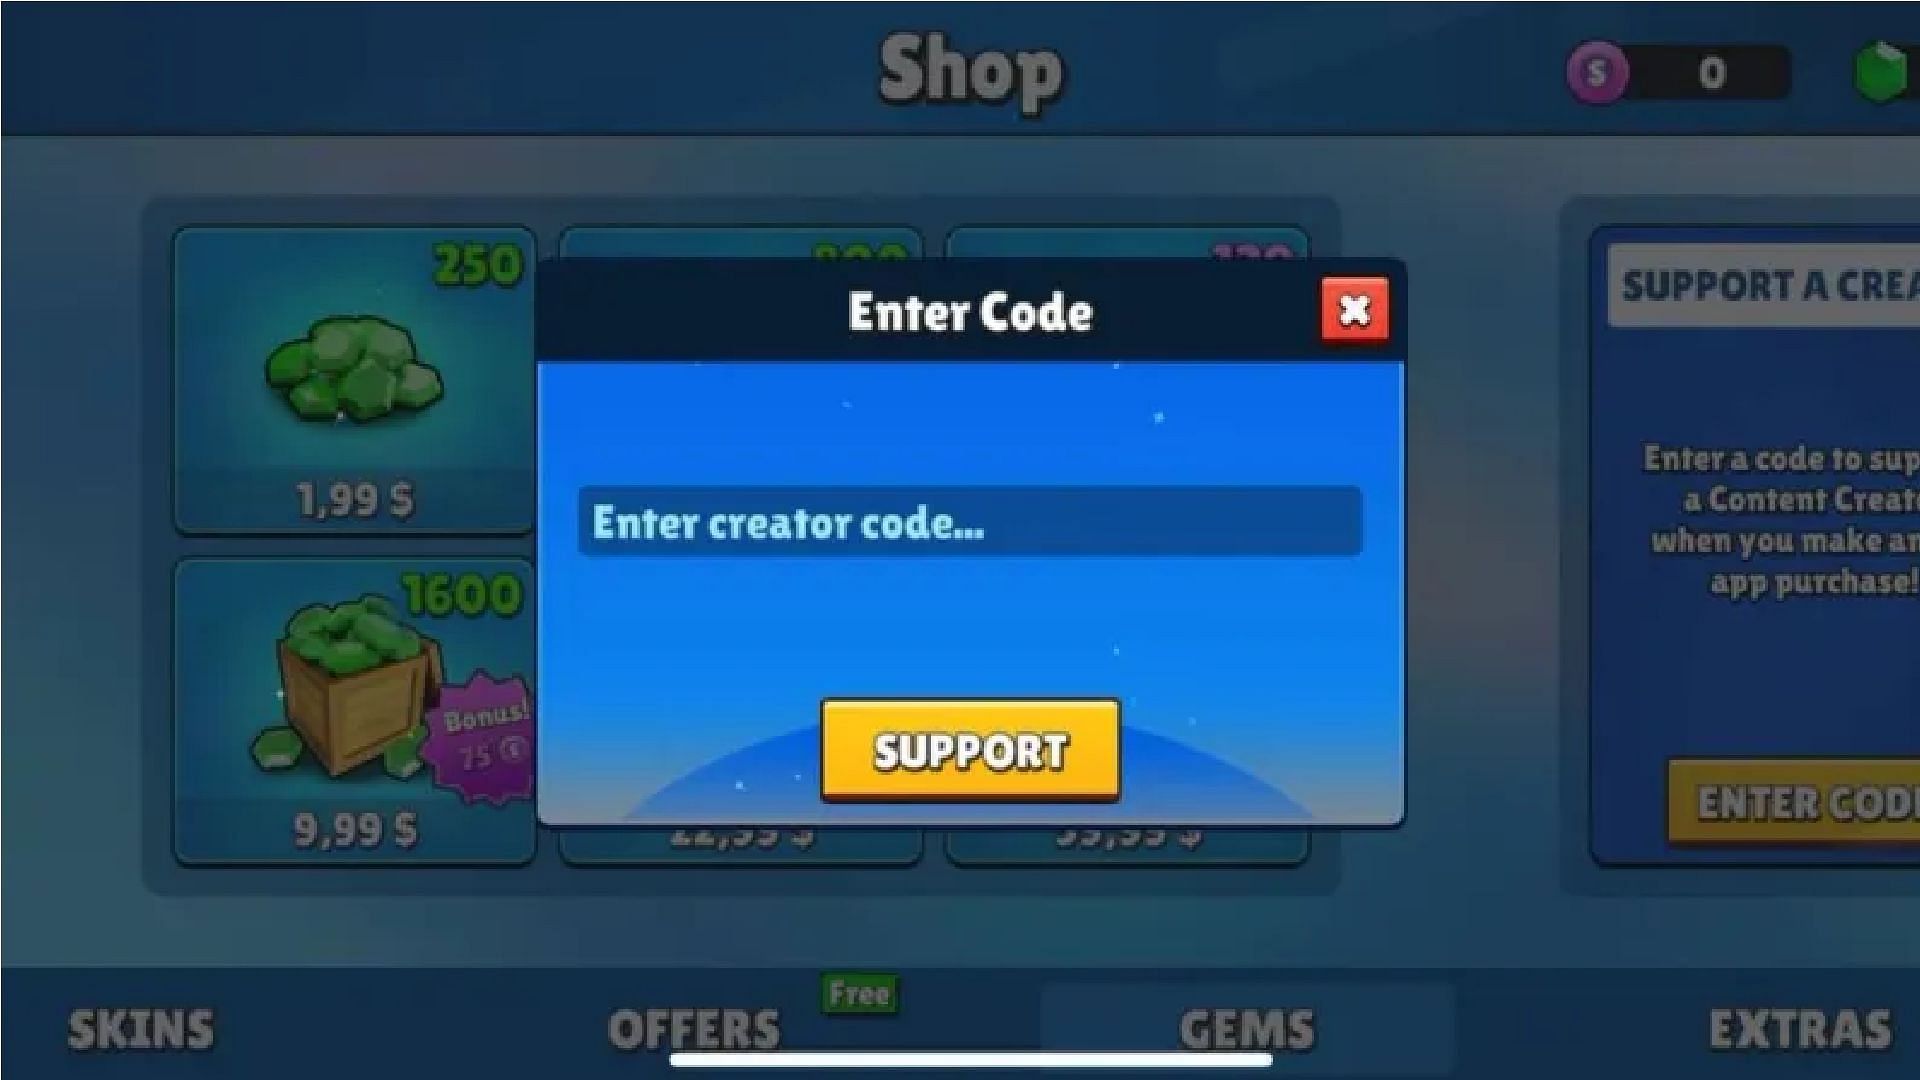 Enter the code here and click on Support (Image via Scopely)